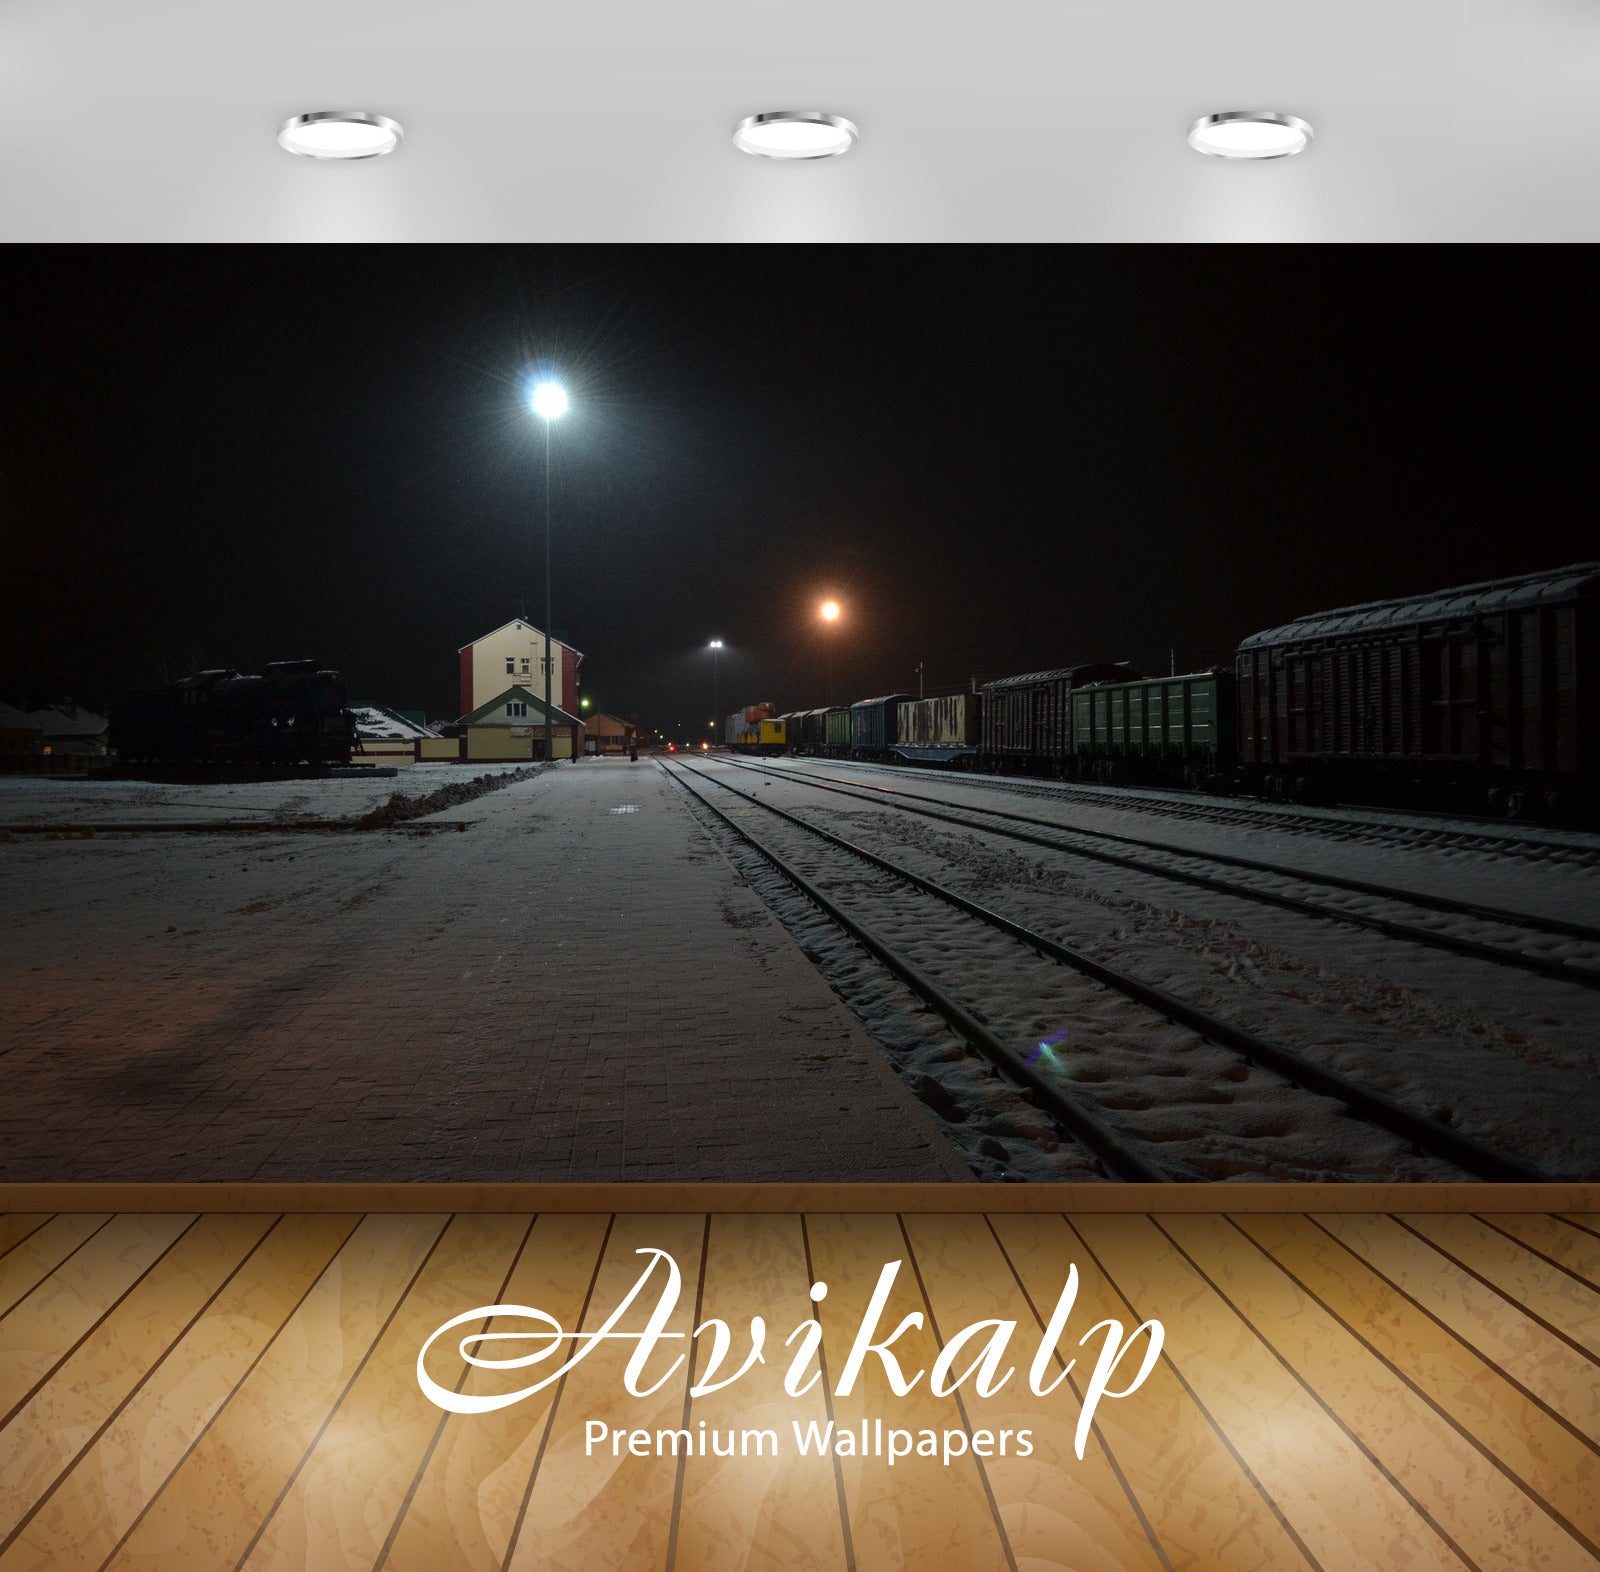 Avikalp Exclusive Awi1733 Railway Track Night View Full HD Wallpapers for Living room, Hall, Kids Ro